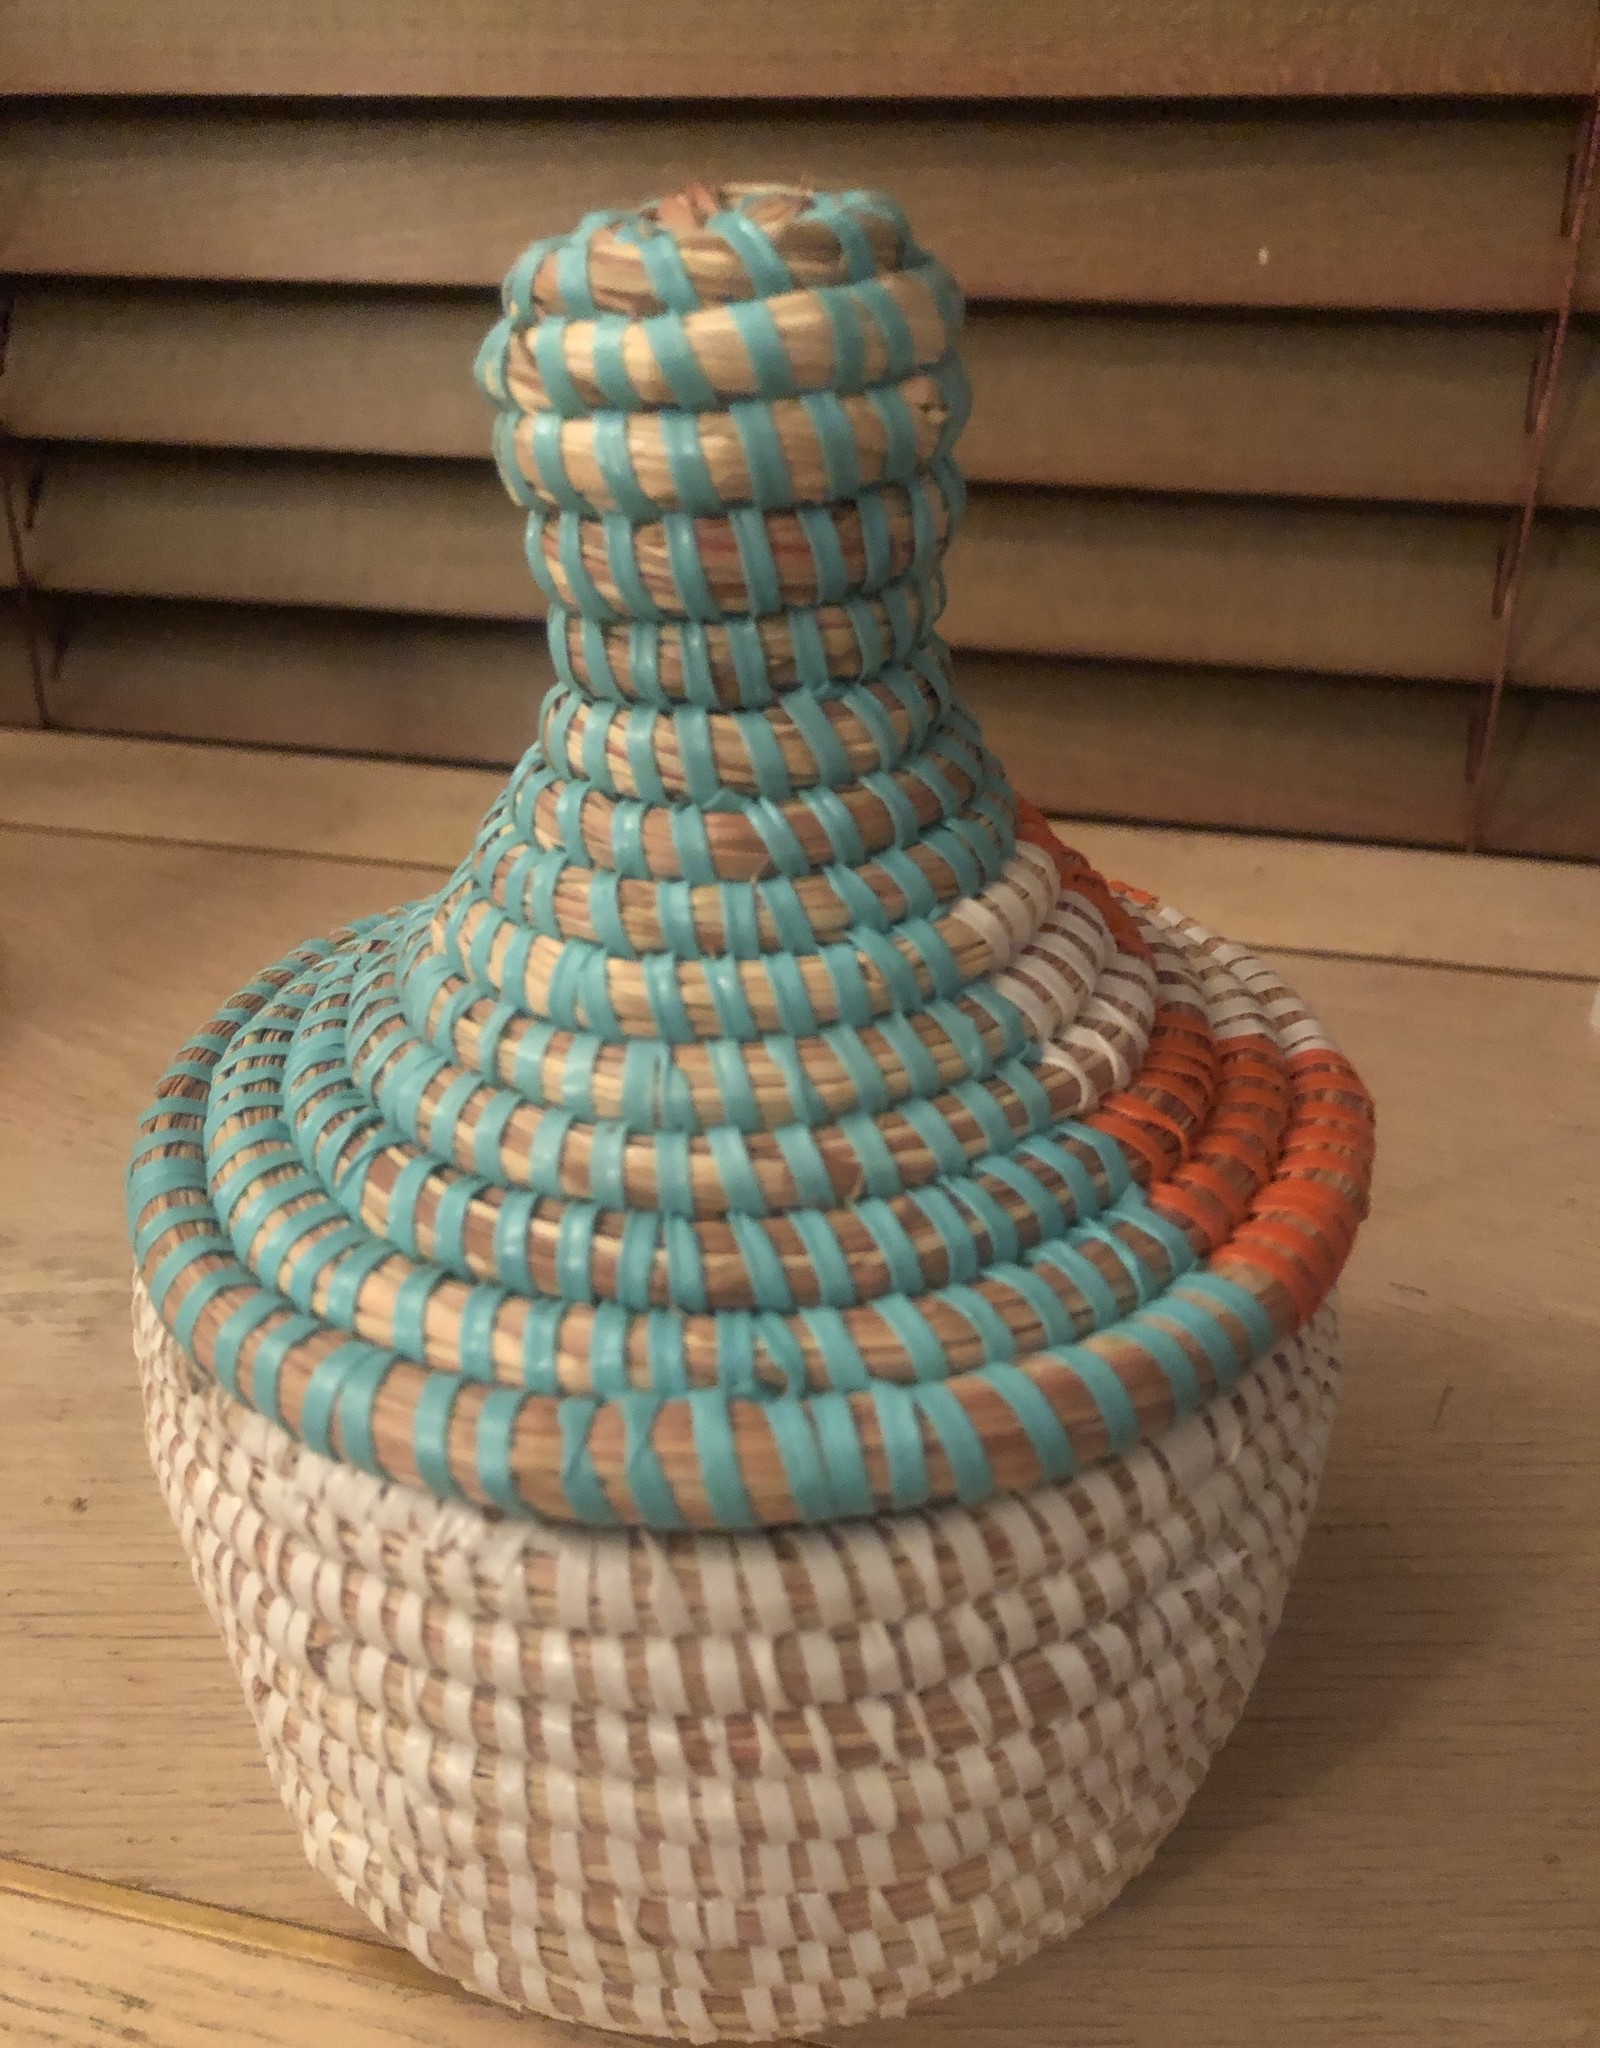 Small Basket with tourqoise and orange top